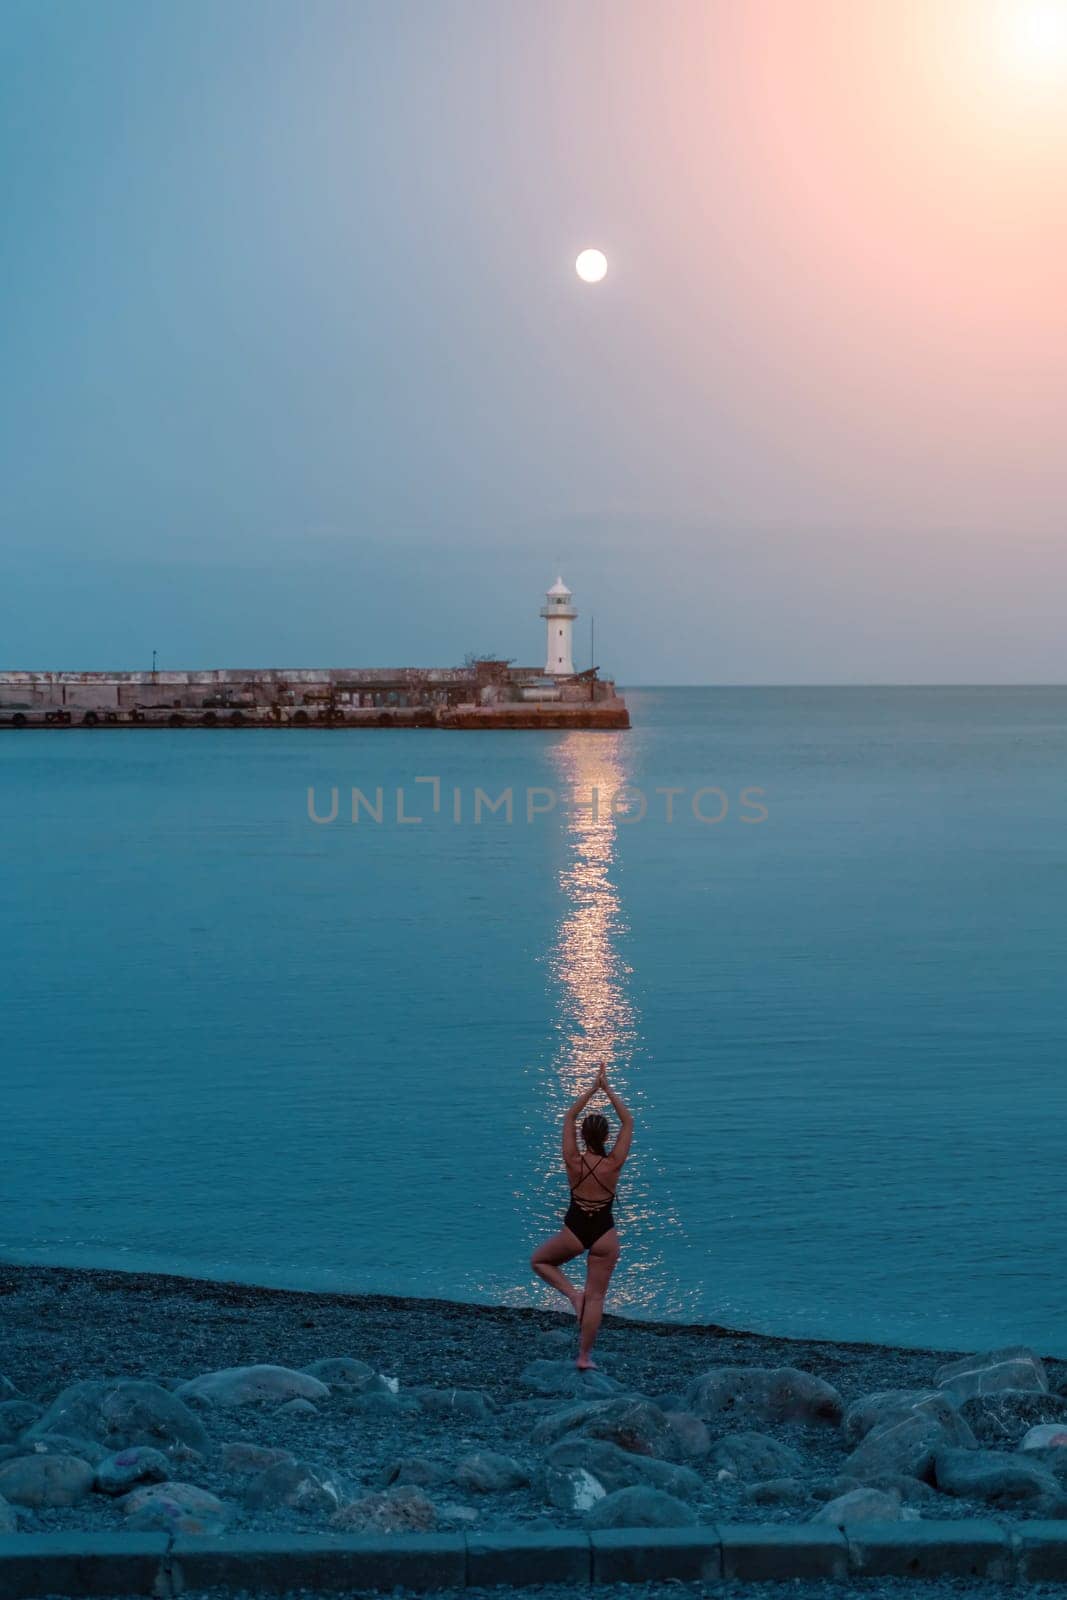 Woman The full moon rises to the lighthouse, the lunar path along the sea leads to the woman